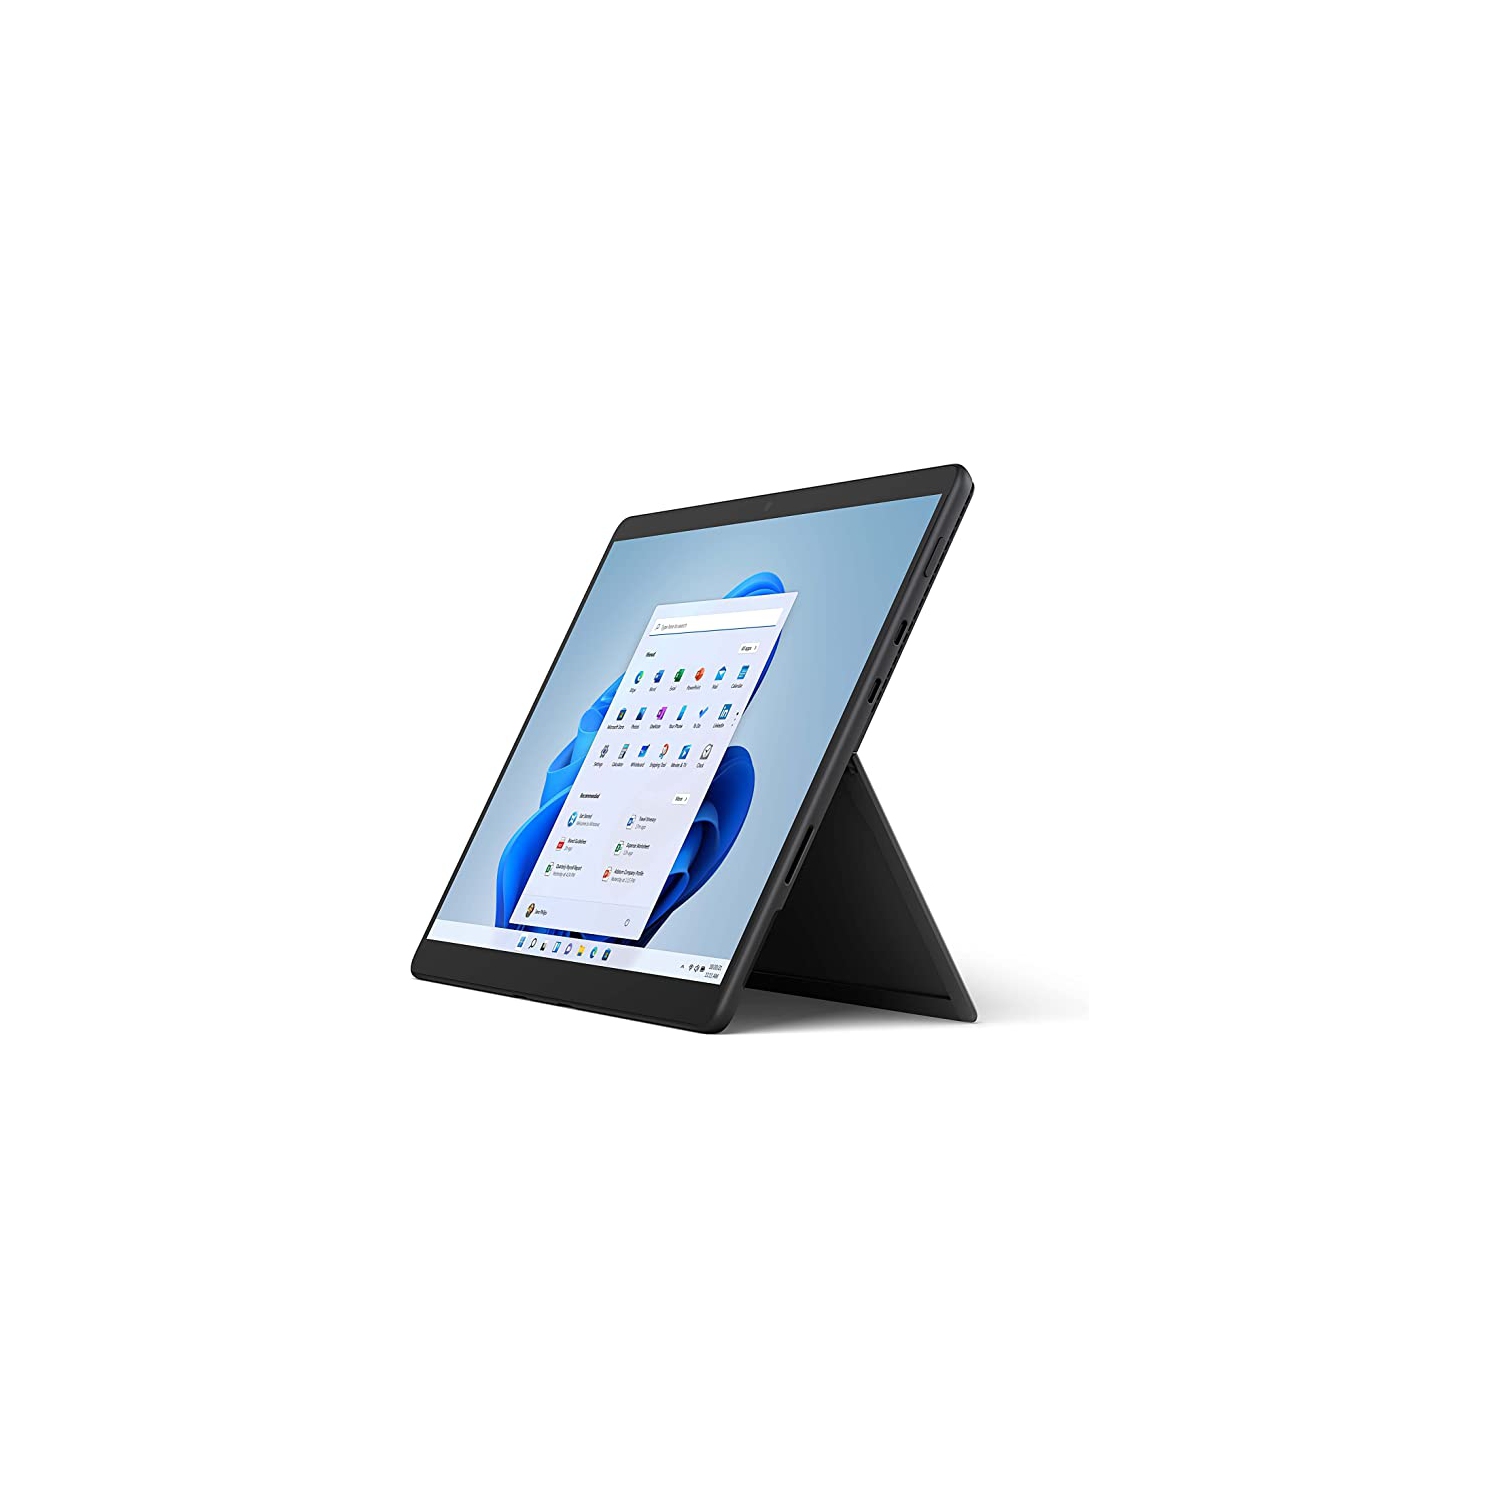 Refurbished (Excellent) Microsoft Surface Pro 8 Tablet – Intel i5, 8GB RAM, 256GB SSD, 13” Touchscreen, Windows 11 Home, Graphite (Accessories Sold Separately)